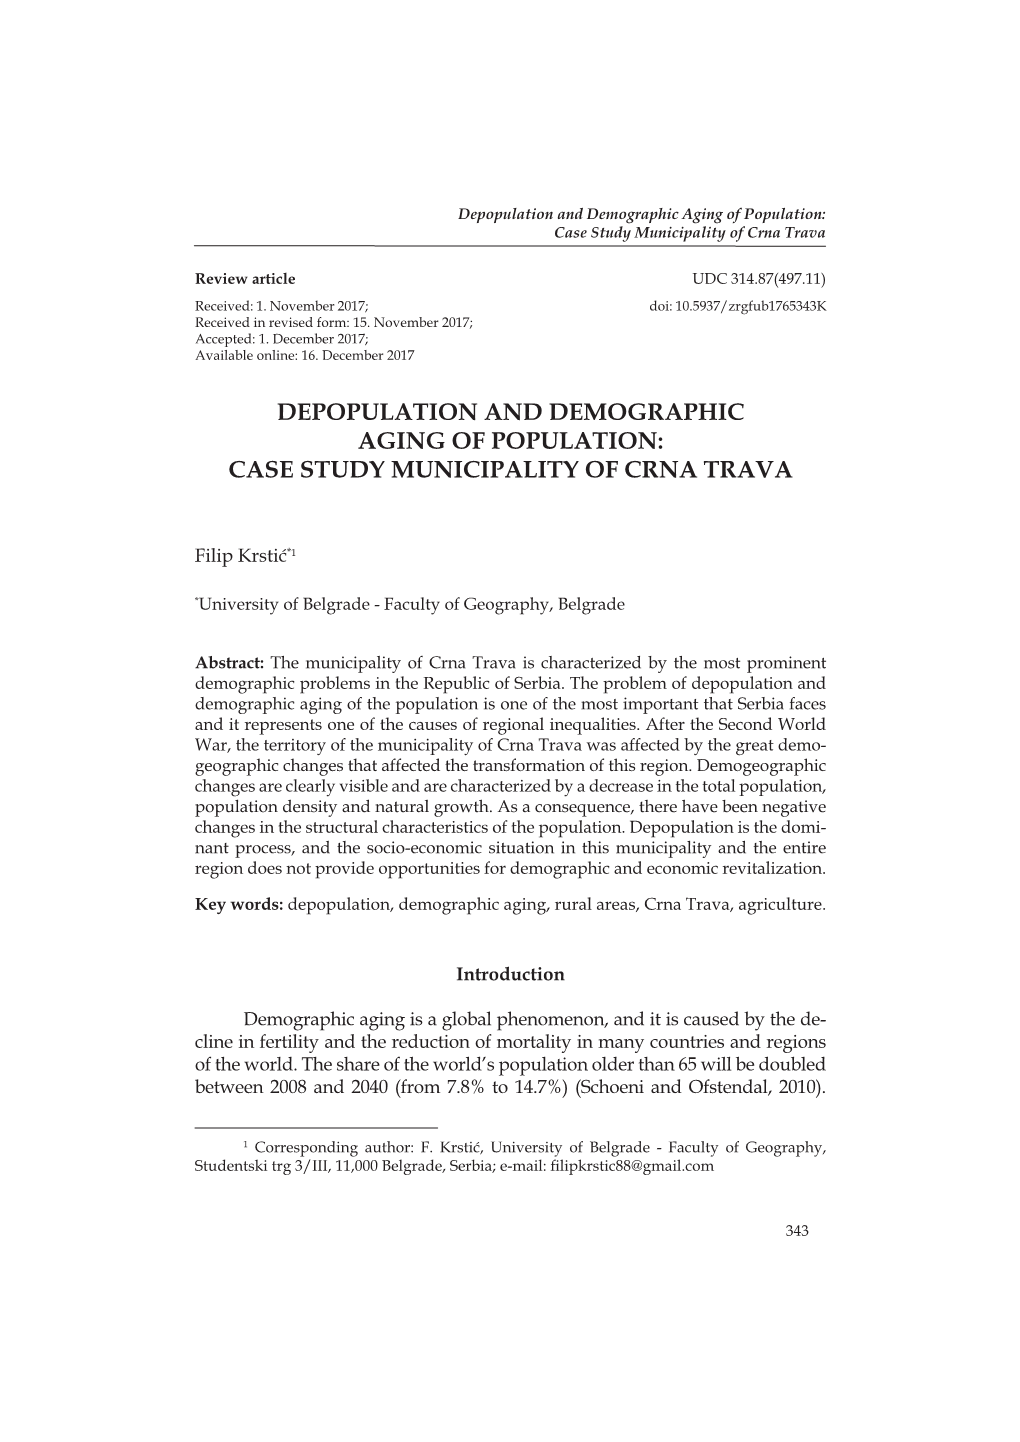 Depopulation and Demographic Aging of Population: Case Study Municipality of Crna Trava